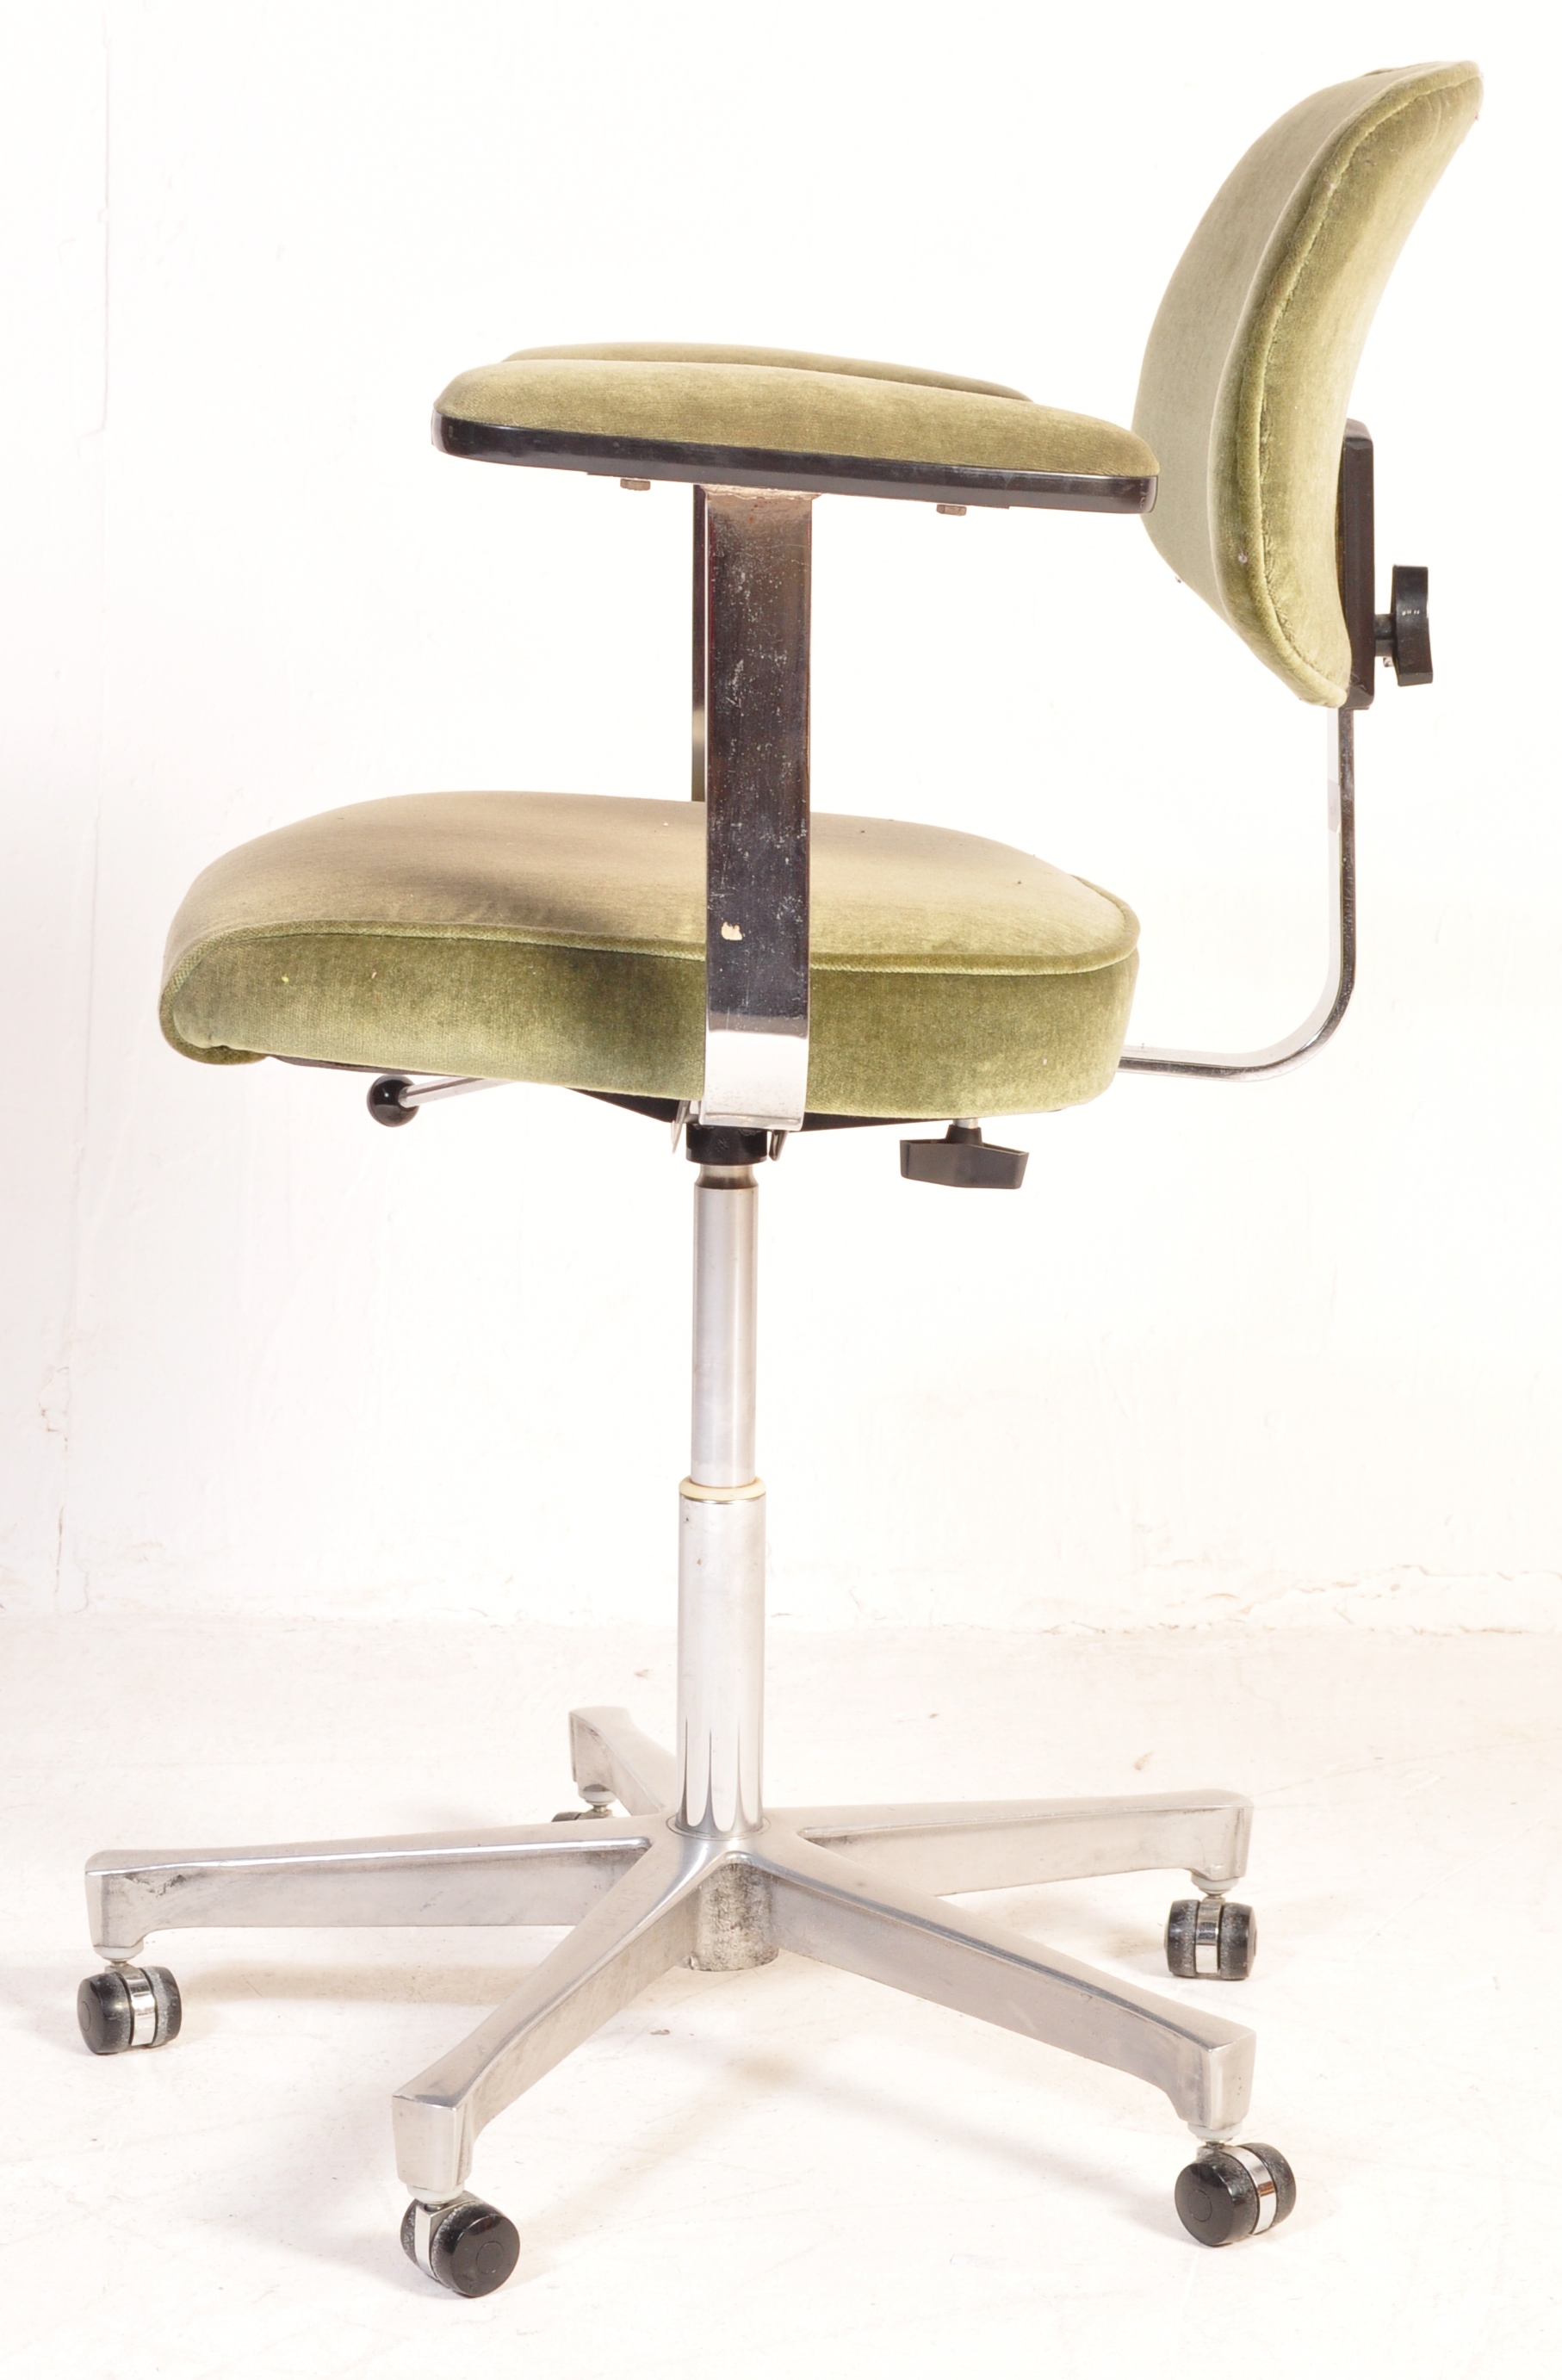 1980'S OLIVE GREEN OFFICE SWIVEL ARMCHAIR / DESK CHAIR - Image 6 of 8